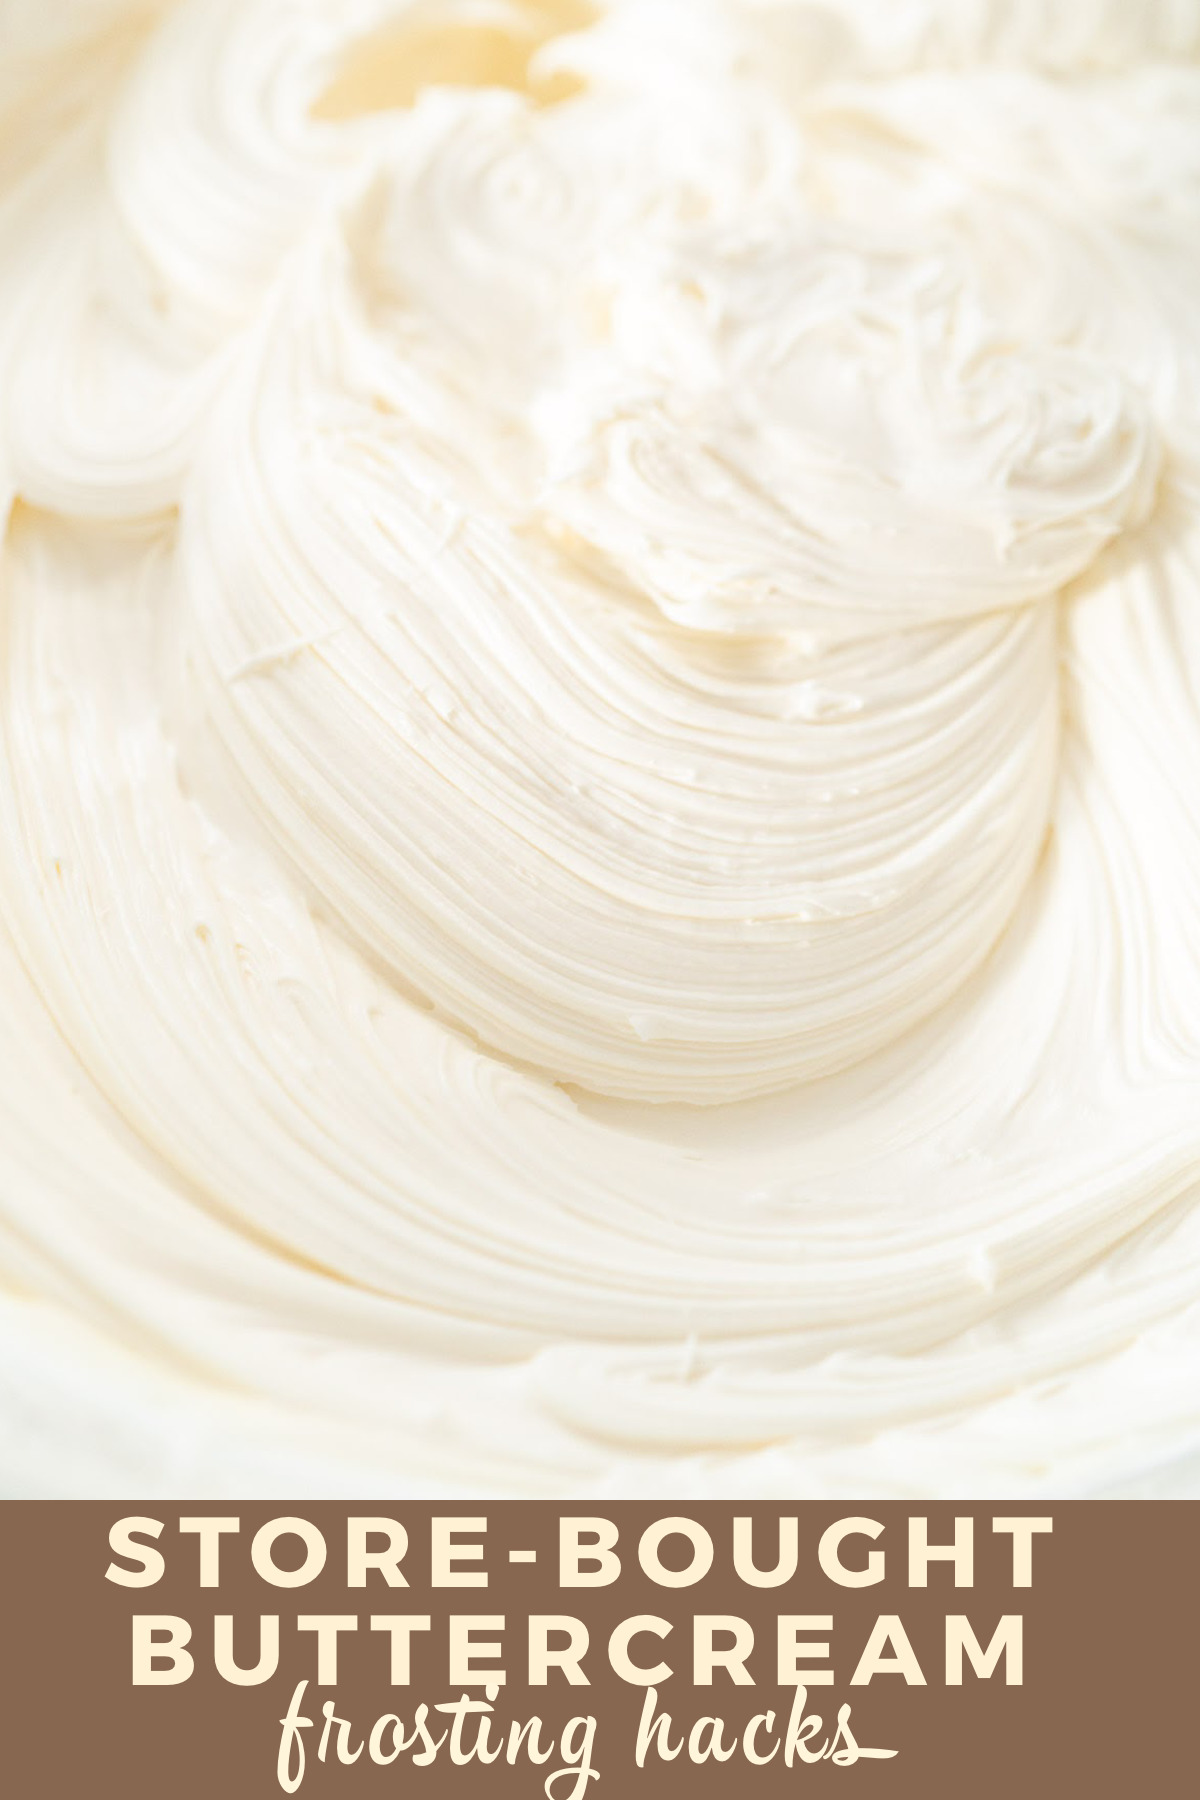 Store-bought buttercream frosting hacks